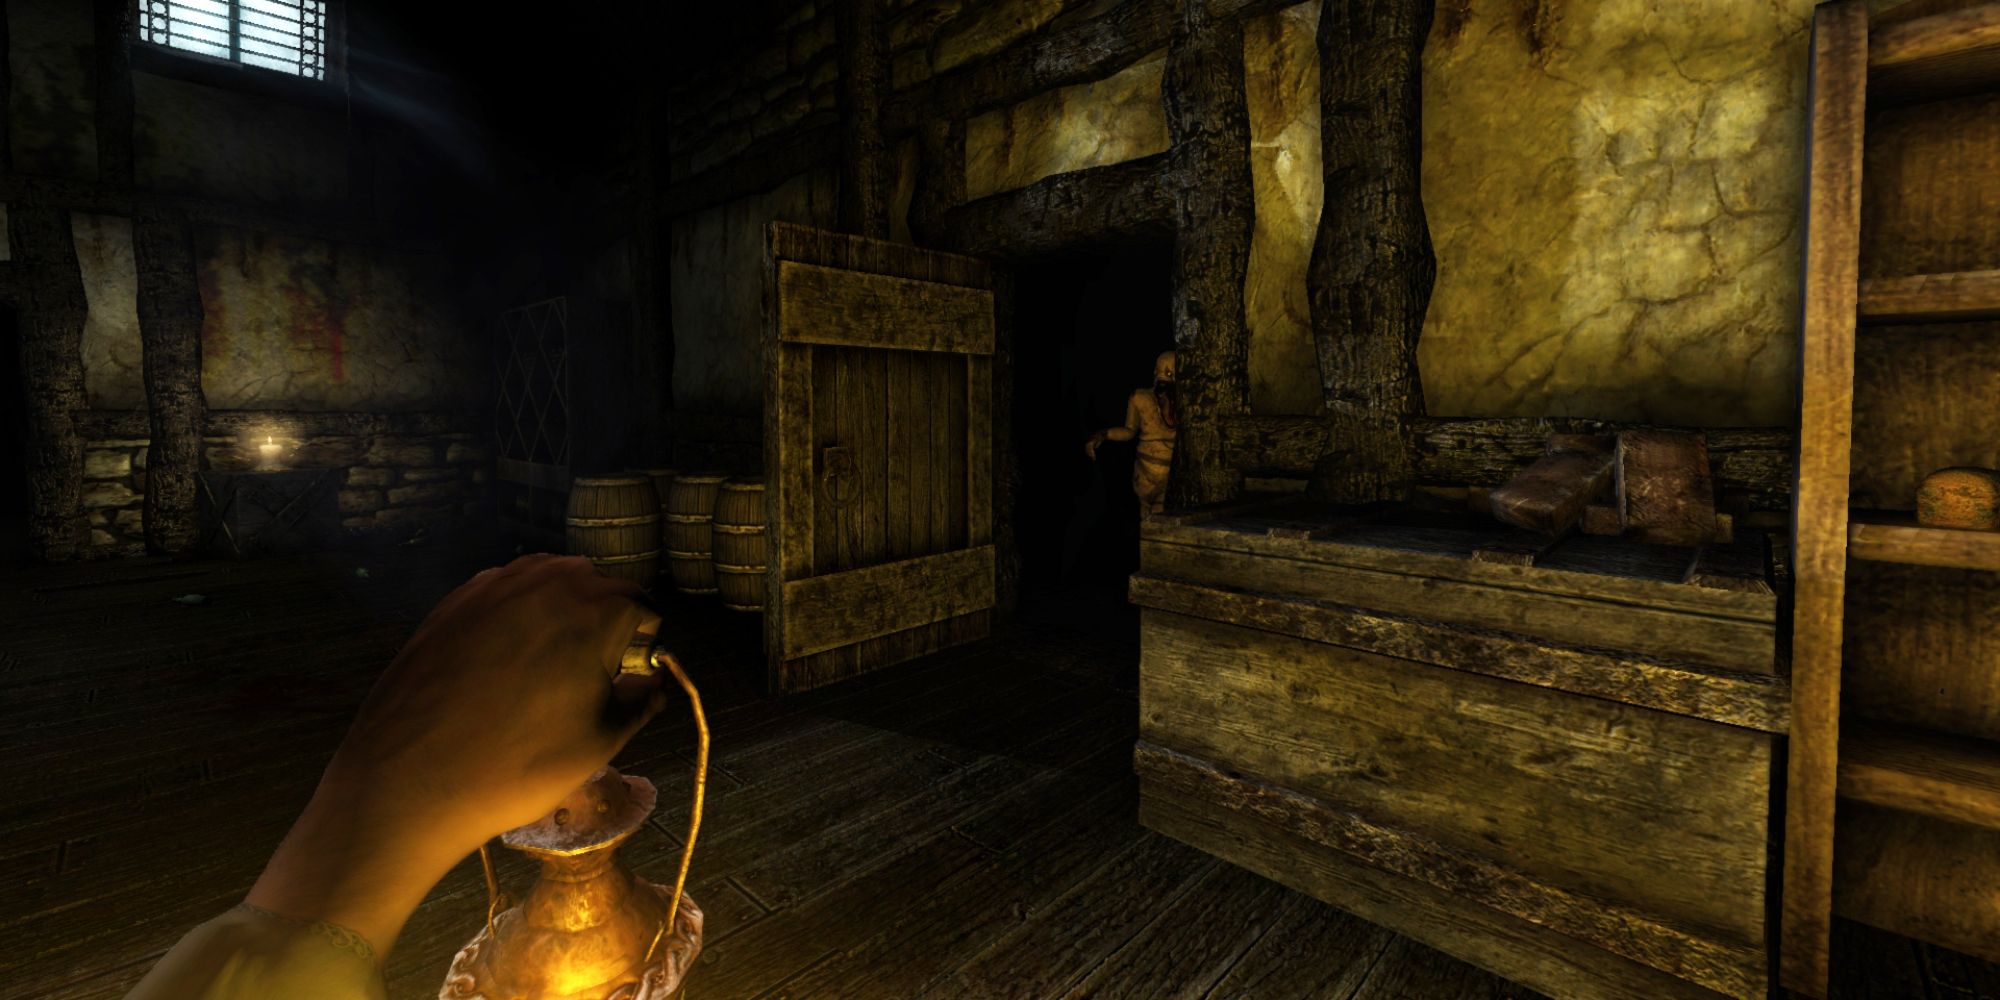 A hand holding a lantern near a door with a zombie inside